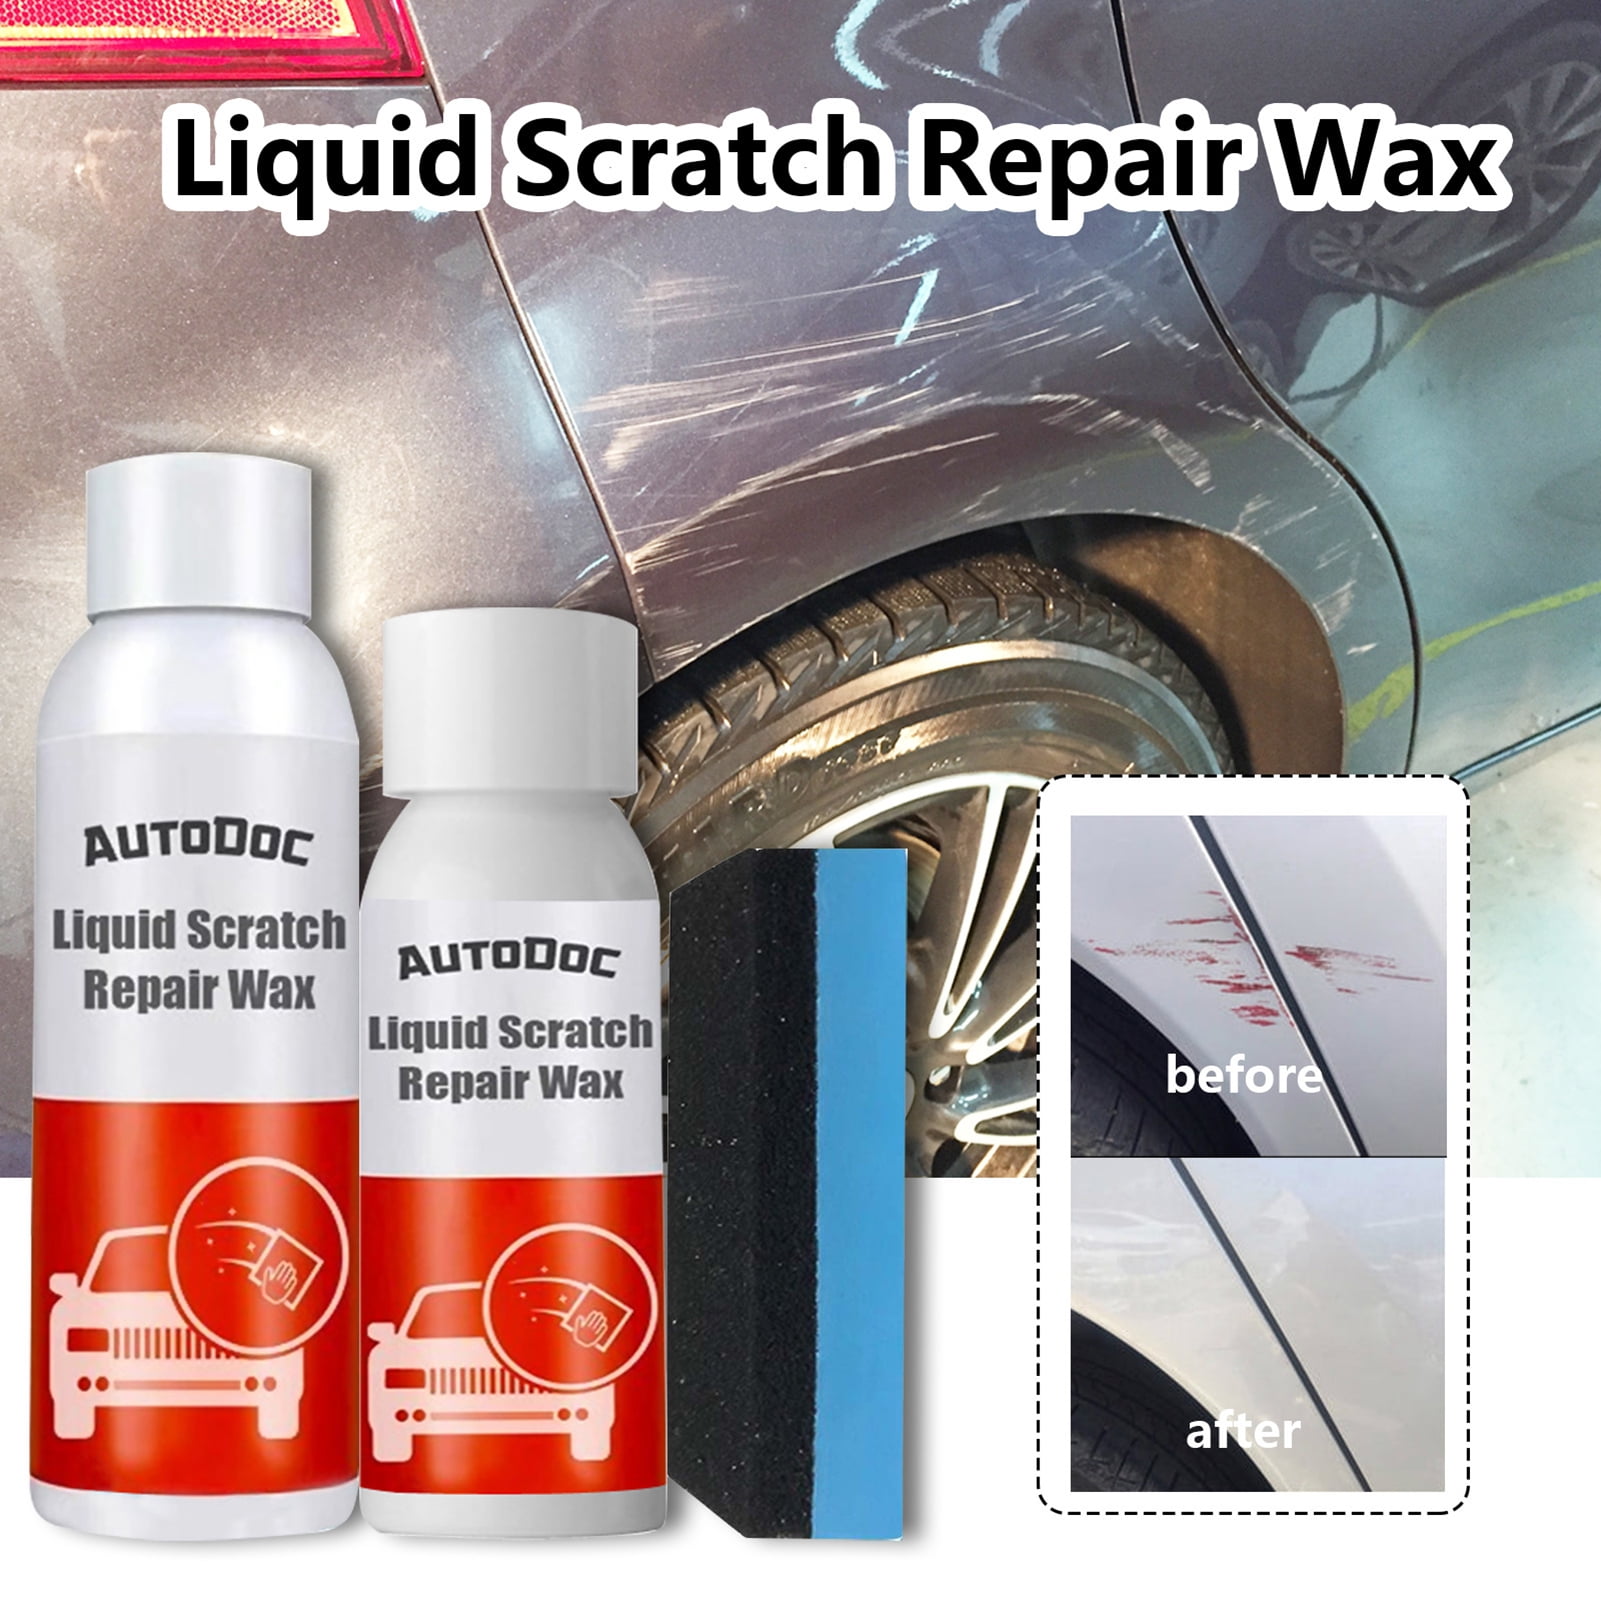 Teissuly Scratch Remover, Magic Car Scratch Repair Kit, Deep Key Scratch  Remover for Cars, Car Scratch & Swirl Remover Repair Polish Paint Agent  Eraser 